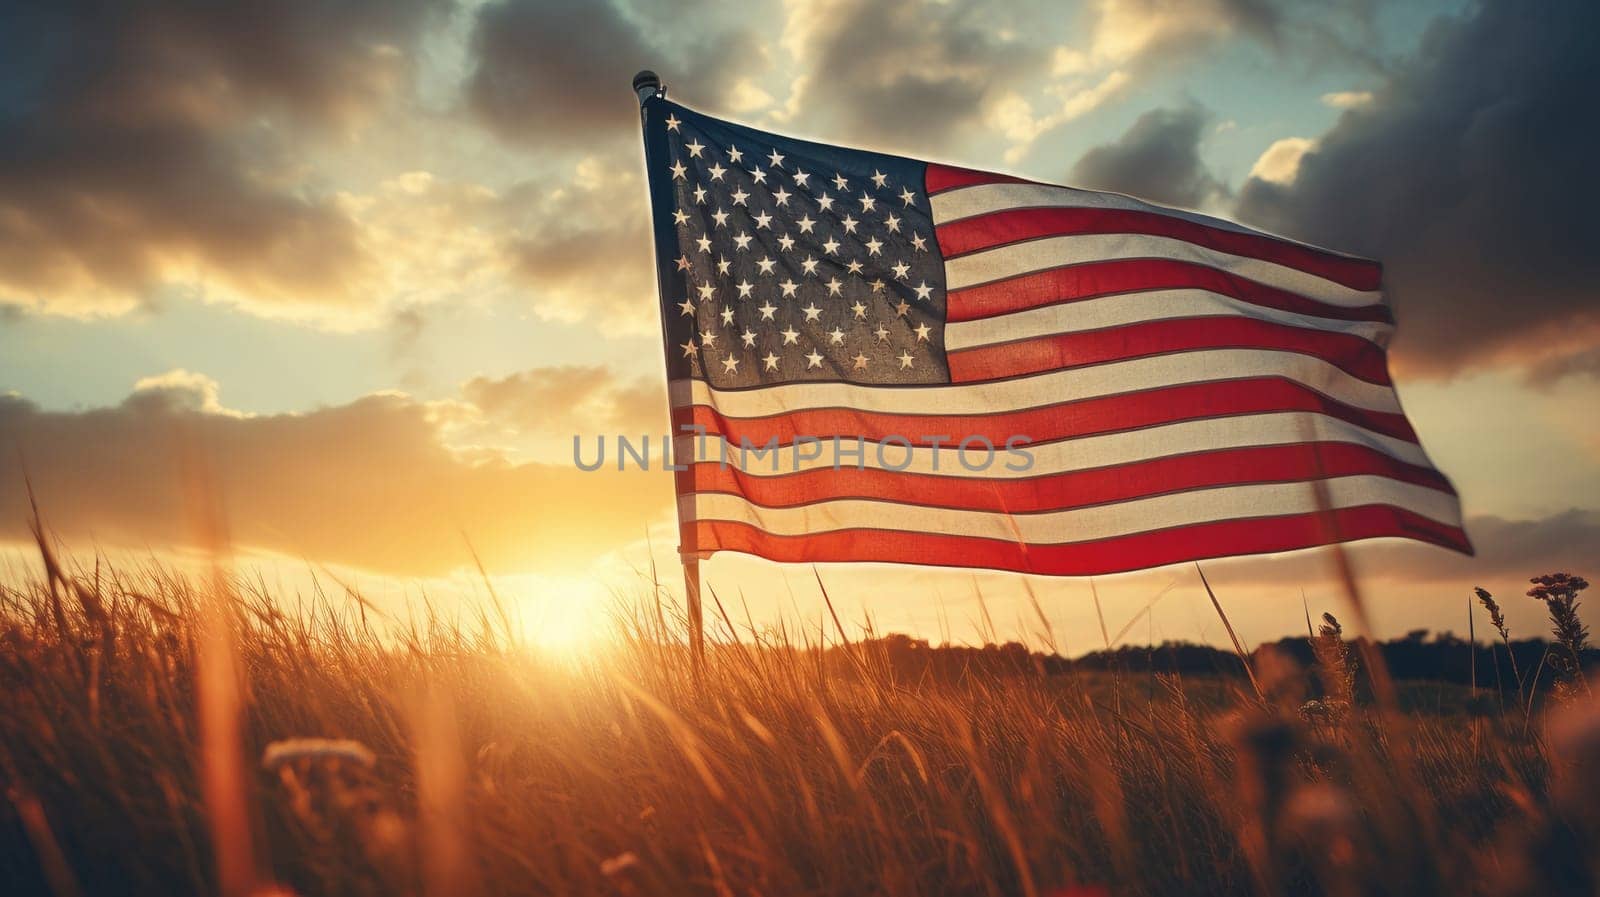 The flag of the United States of America flutters in nature among beautiful flowers against the backdrop of the setting sun. by Alla_Yurtayeva